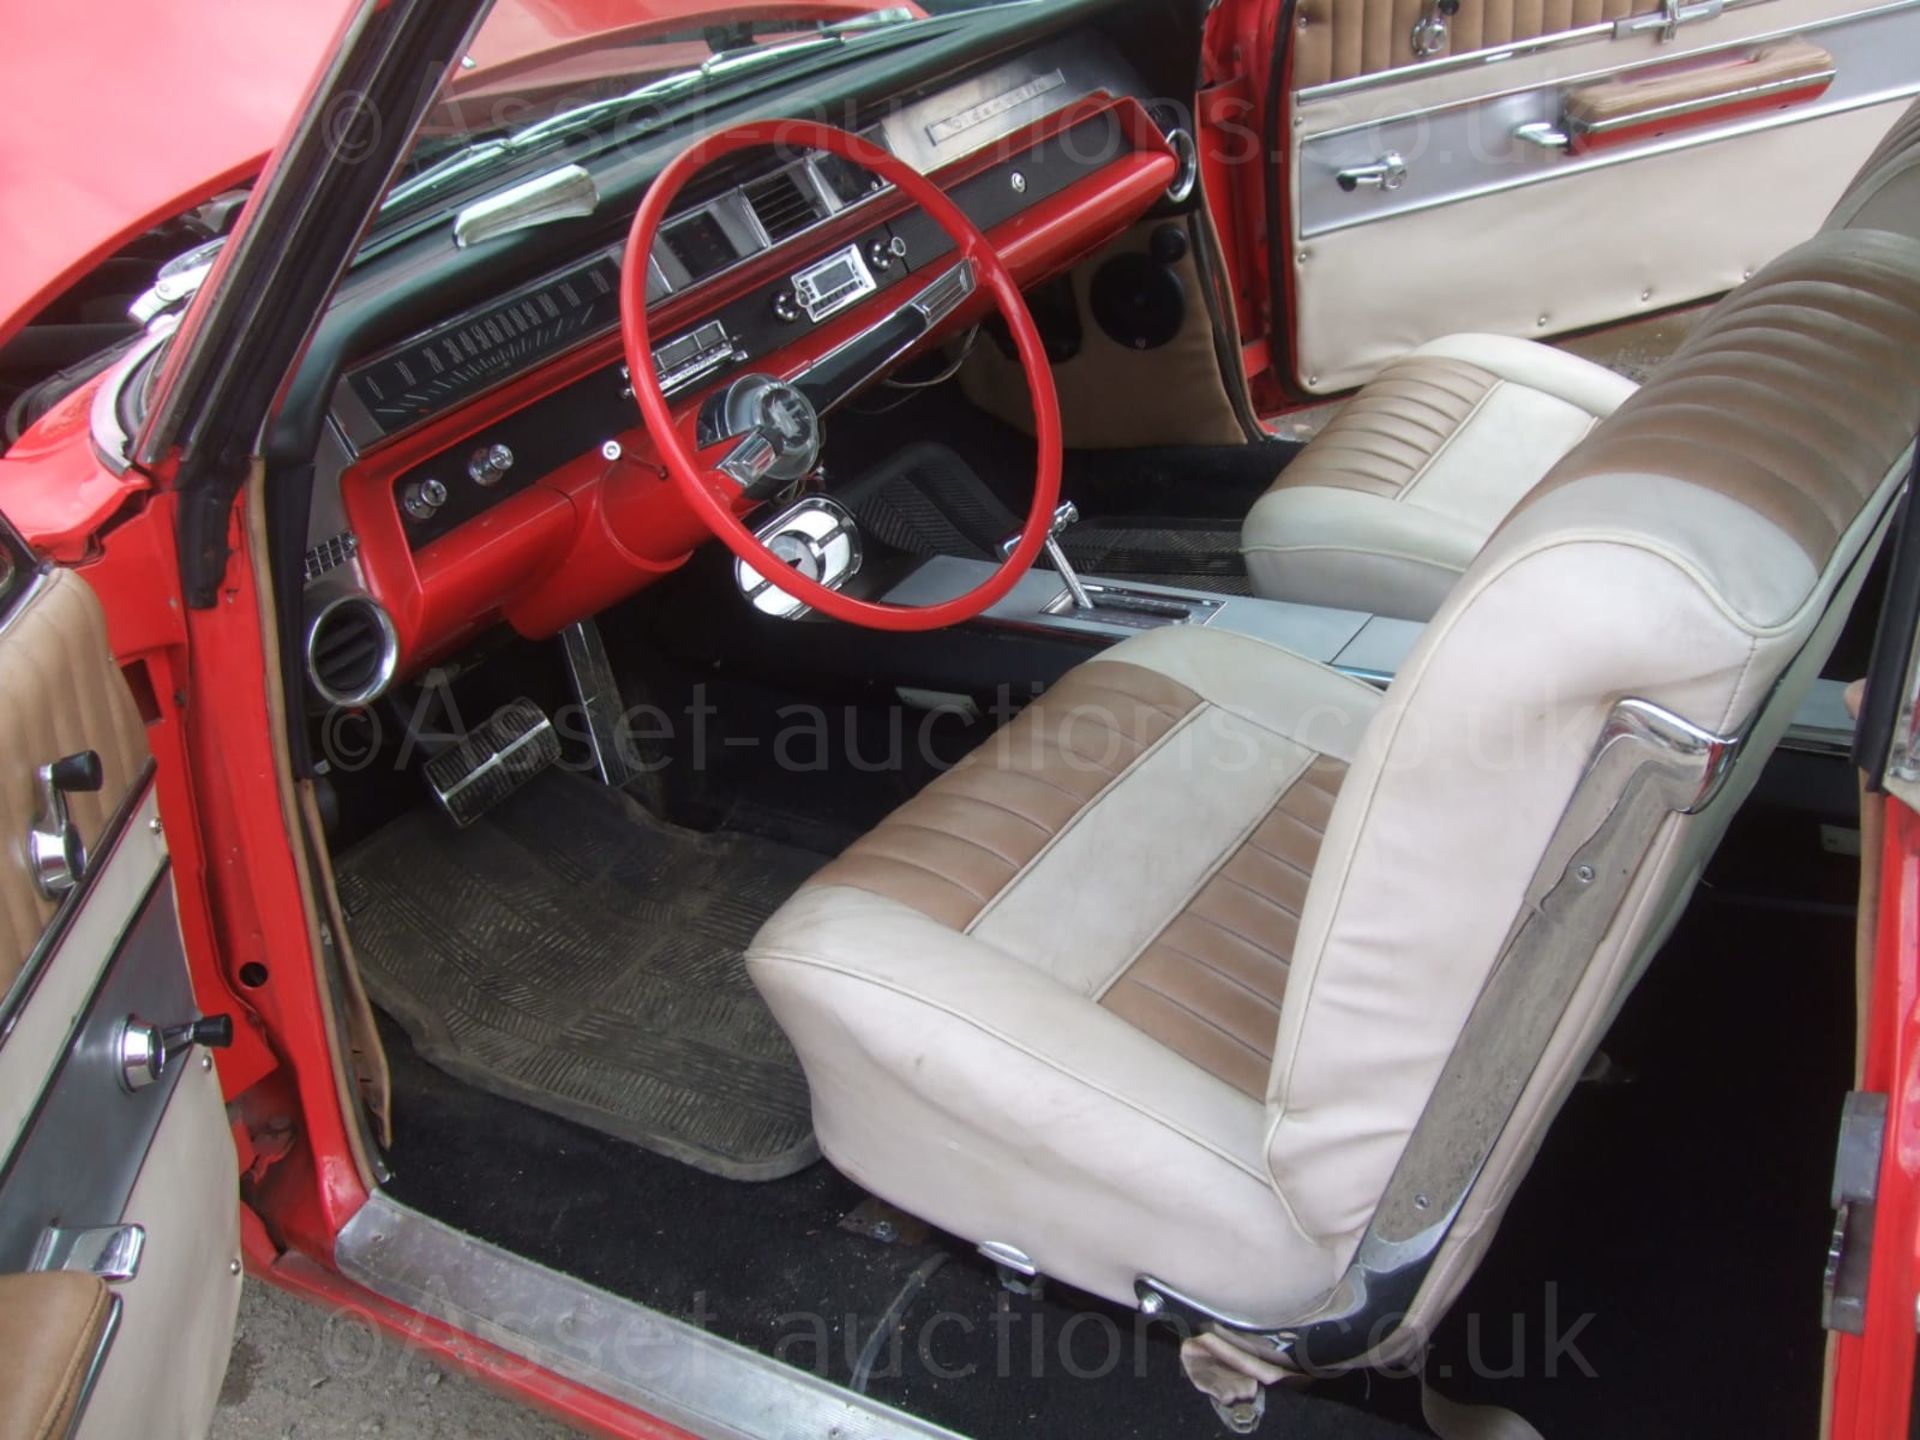 1963 OLDSMOBILE, STARFIRE COUPE, RARE CAR! SHOWING 71,026 MILES, MOT AND TAX EXEMPT *NO VAT* - Image 22 of 22